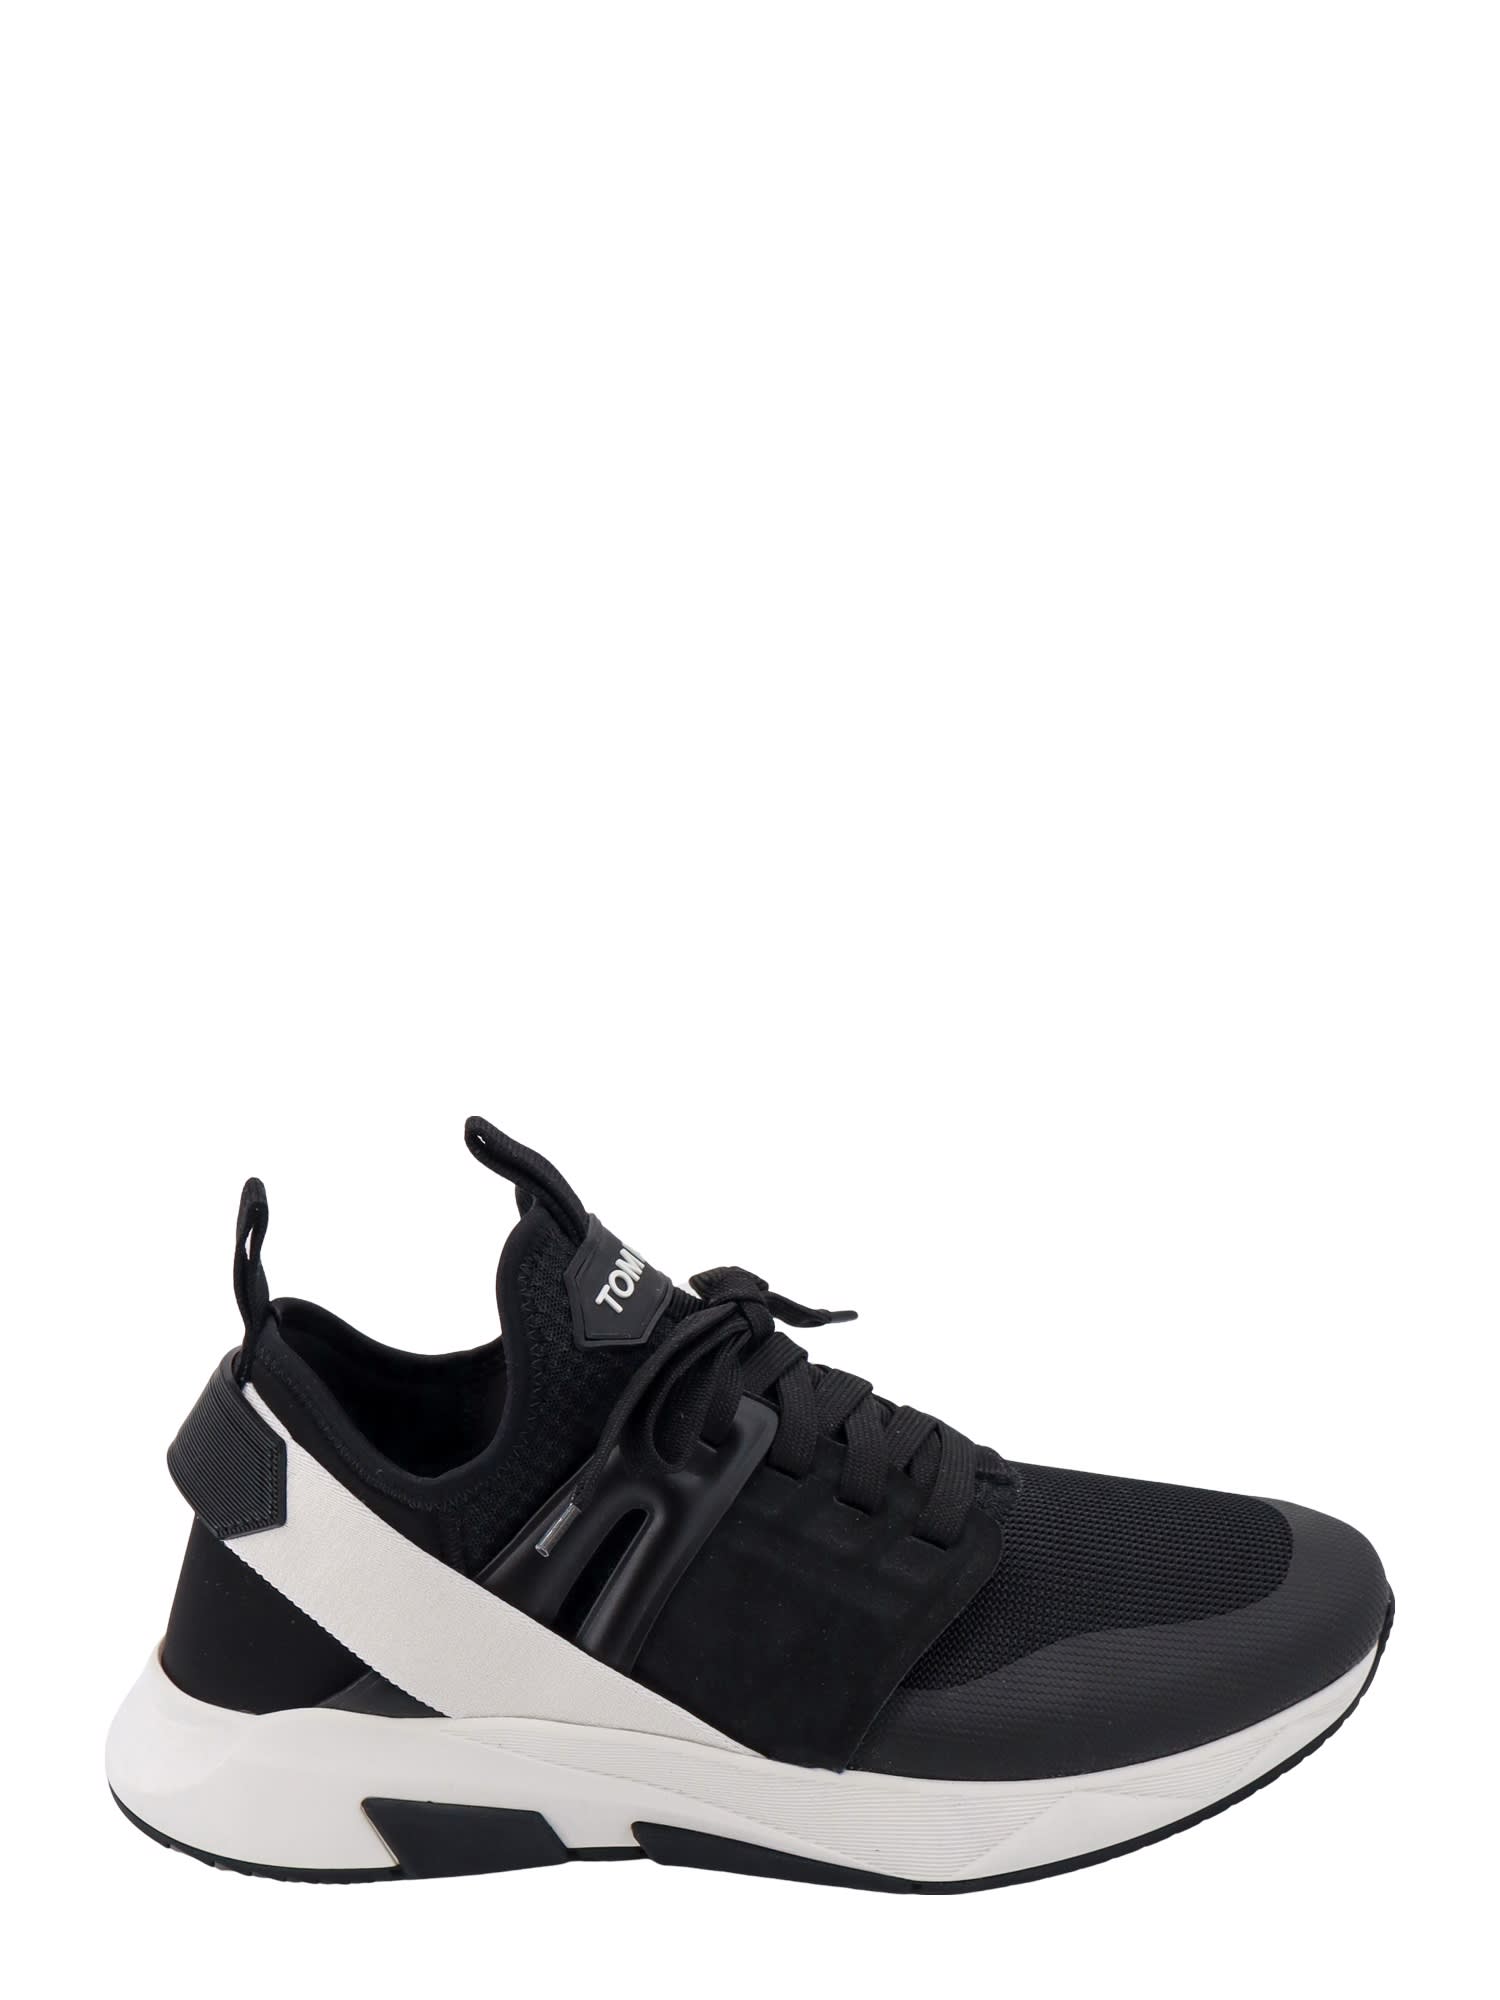 Shop Tom Ford Jago Sneakers In Black